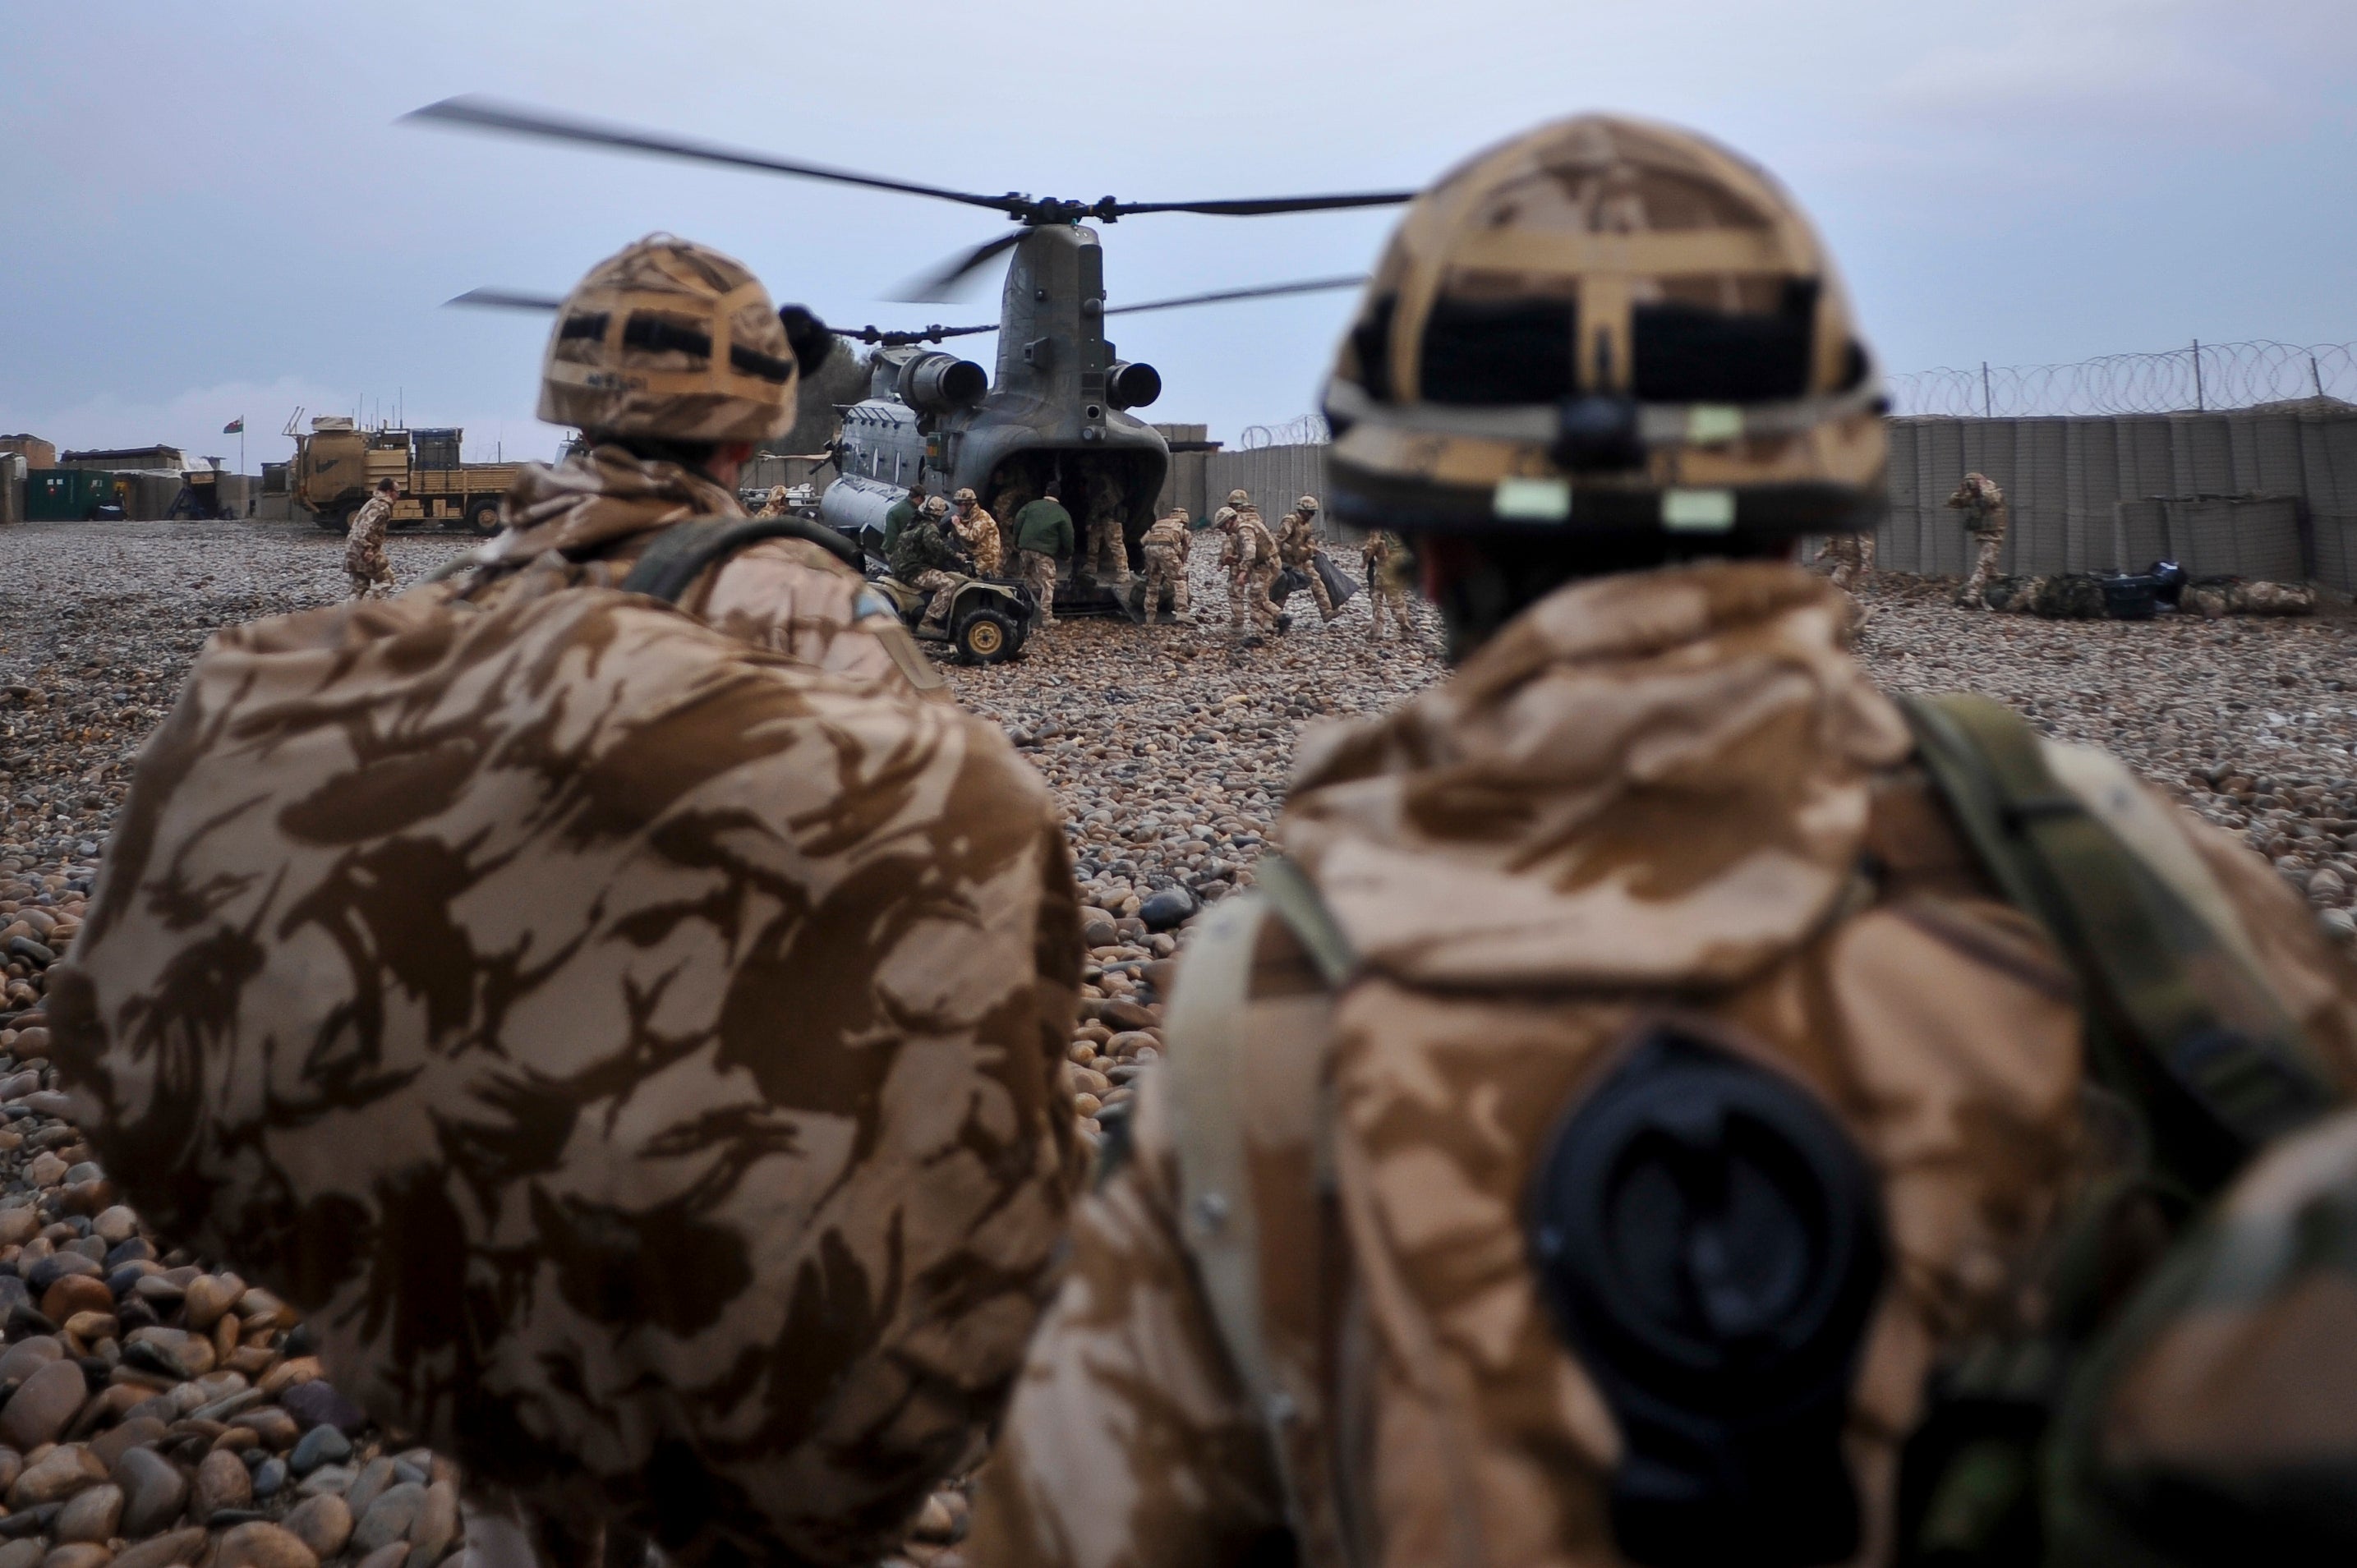 Ministers said the plan aims to make the UK ‘the best place in the world to be a veteran’ (Ben Birchall/PA)